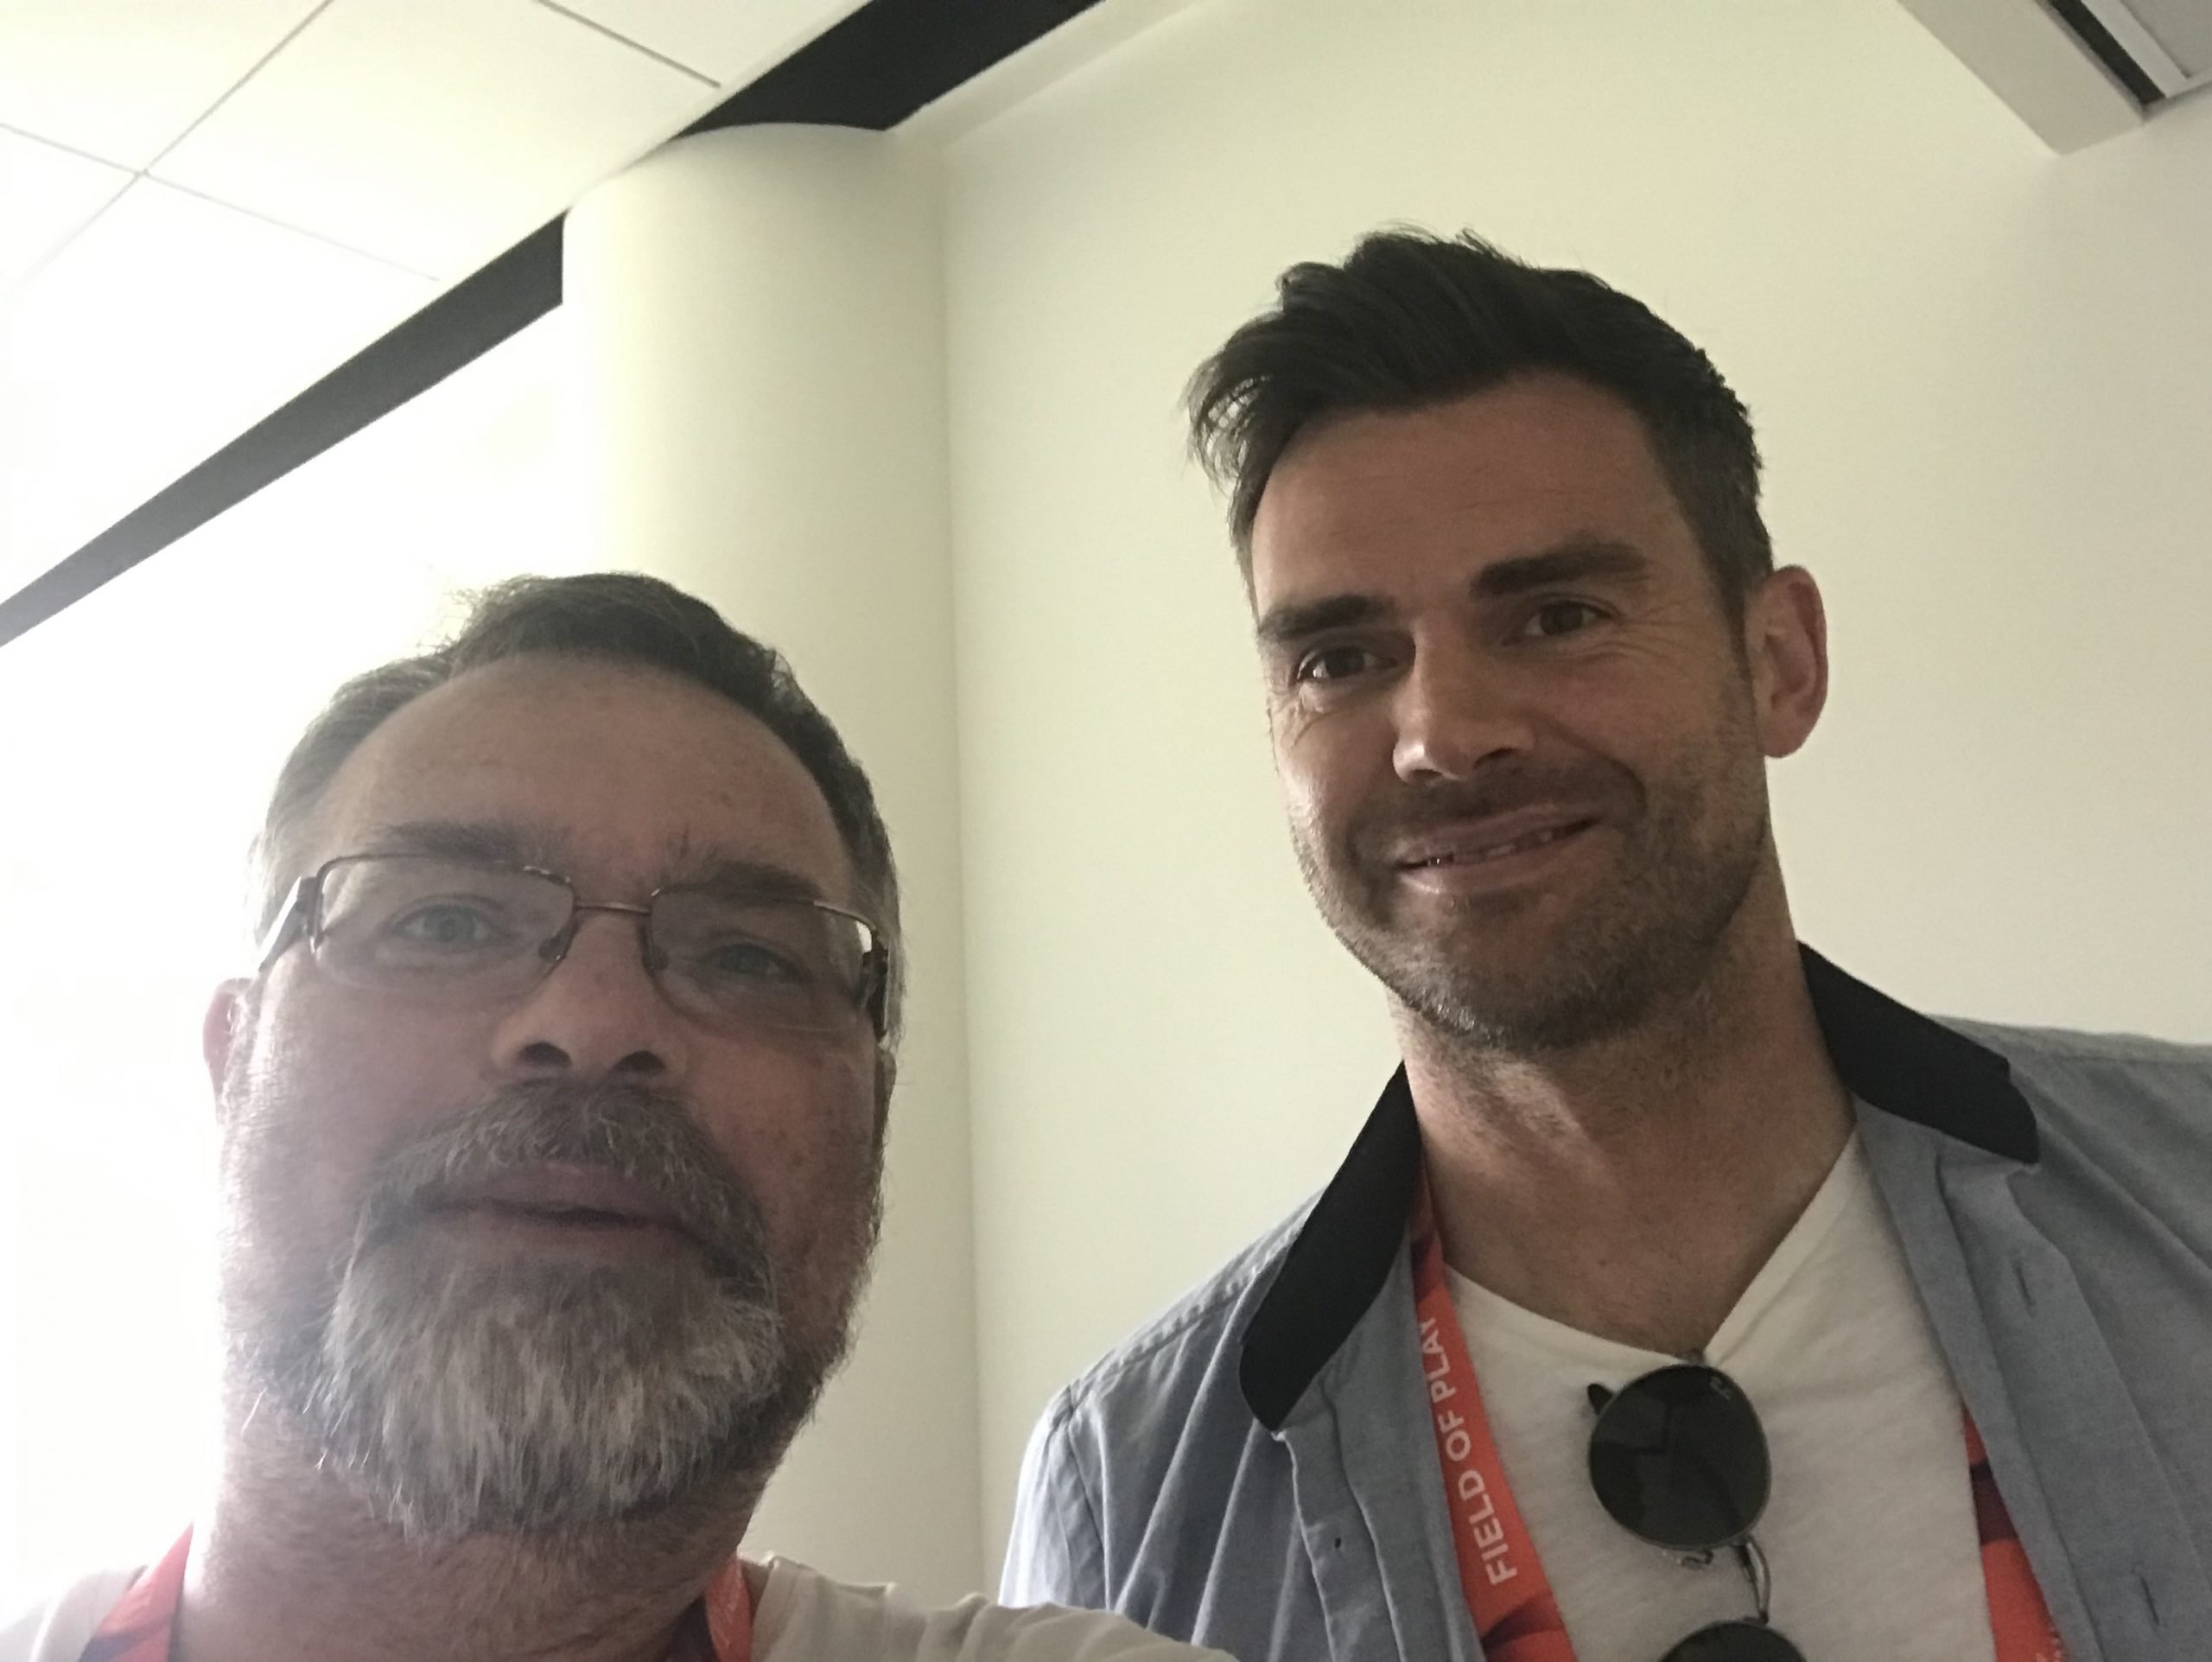 Guerilla cricket founder, Nigel Walker, poses with Jimmy Anderson